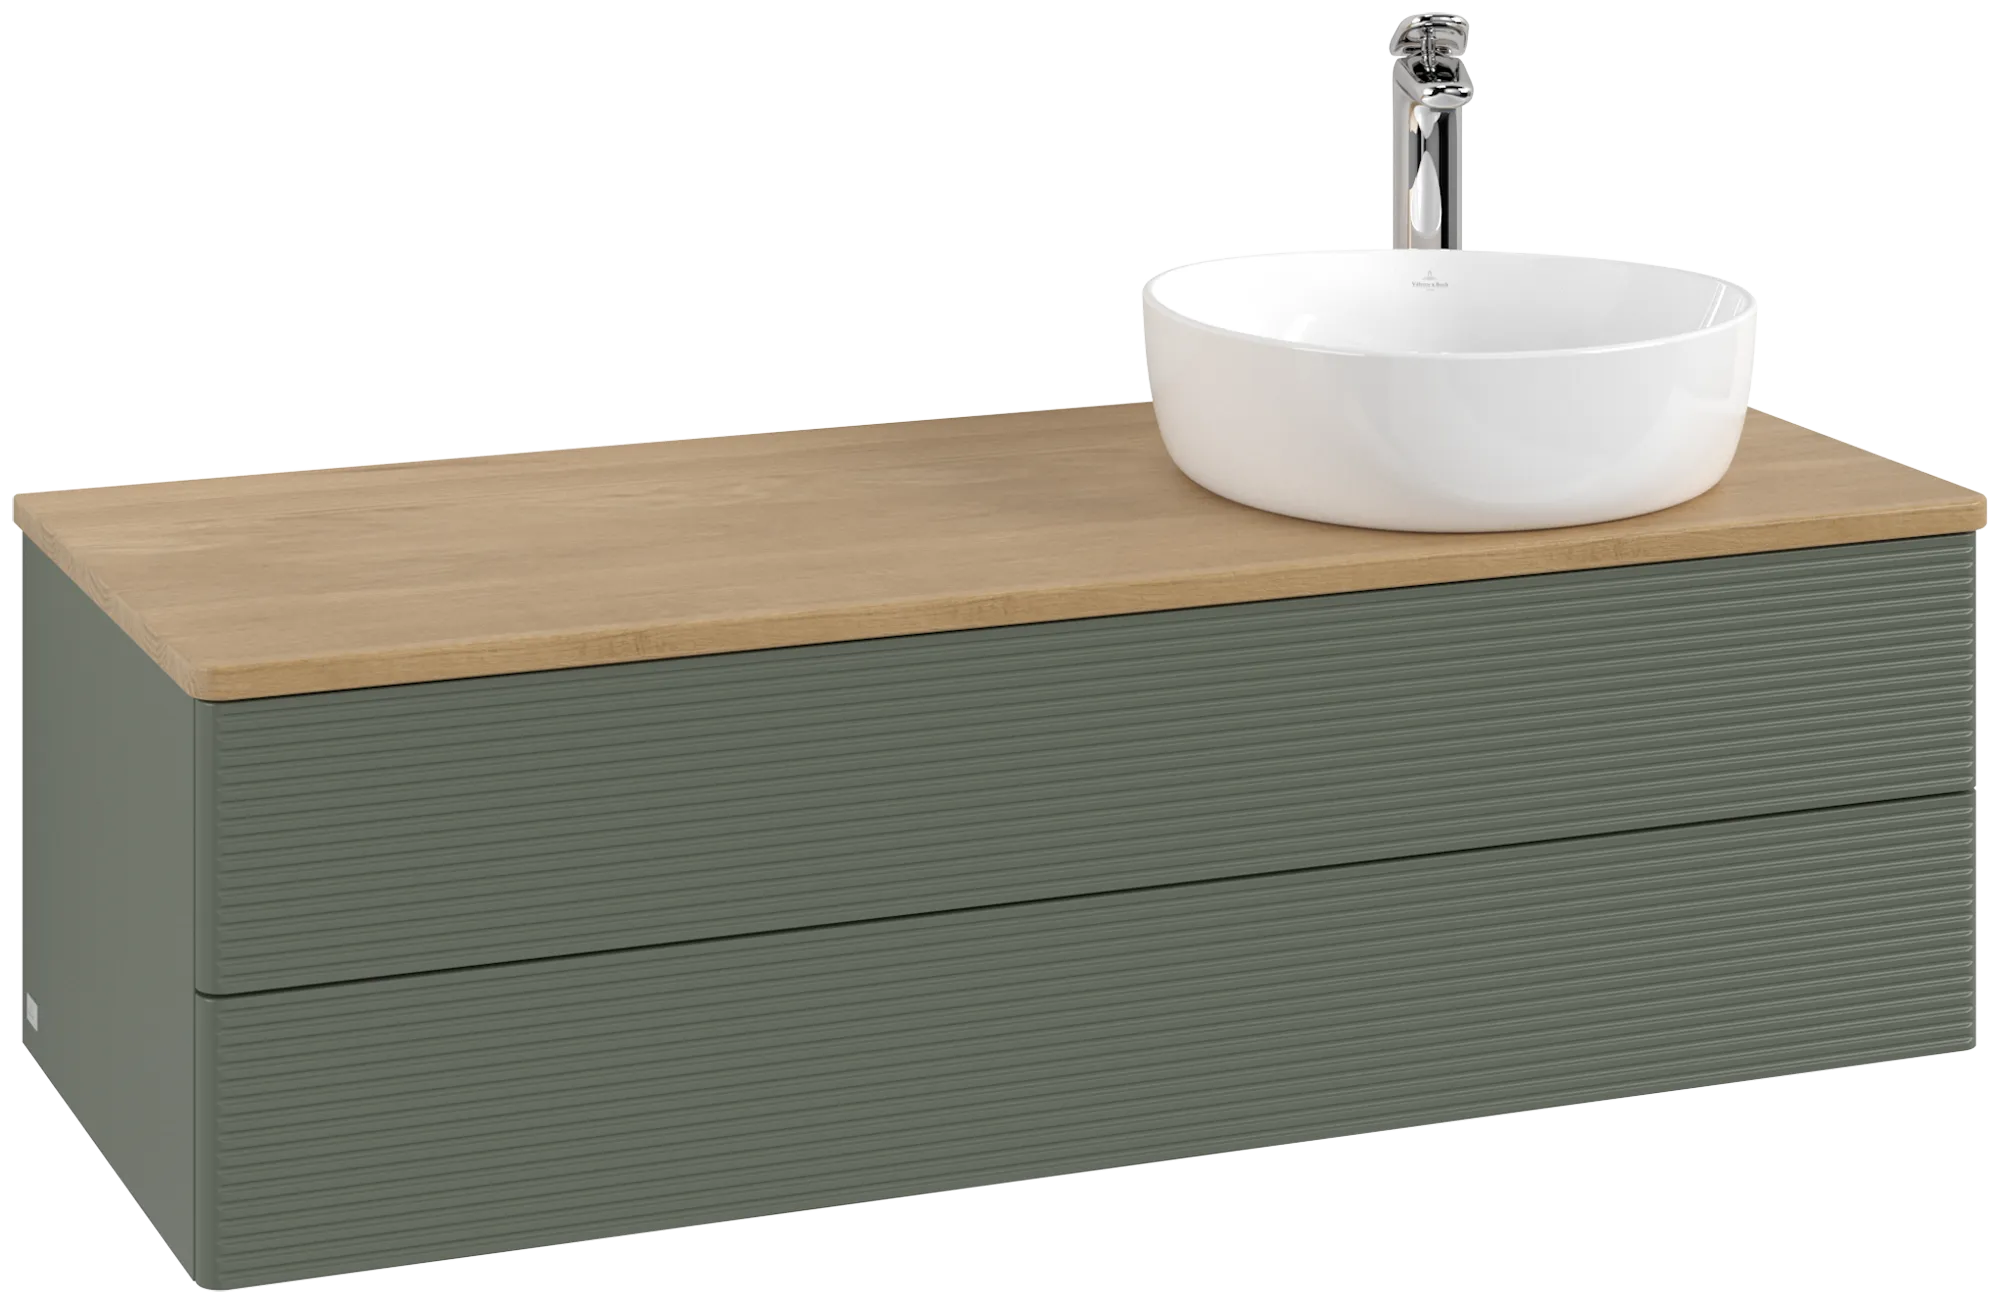 Obrázek VILLEROY BOCH Antao Vanity unit, with lighting, 2 pull-out compartments, 1200 x 360 x 500 mm, Front with grain texture, Leaf Green Matt Lacquer / Honey Oak #L23151HL